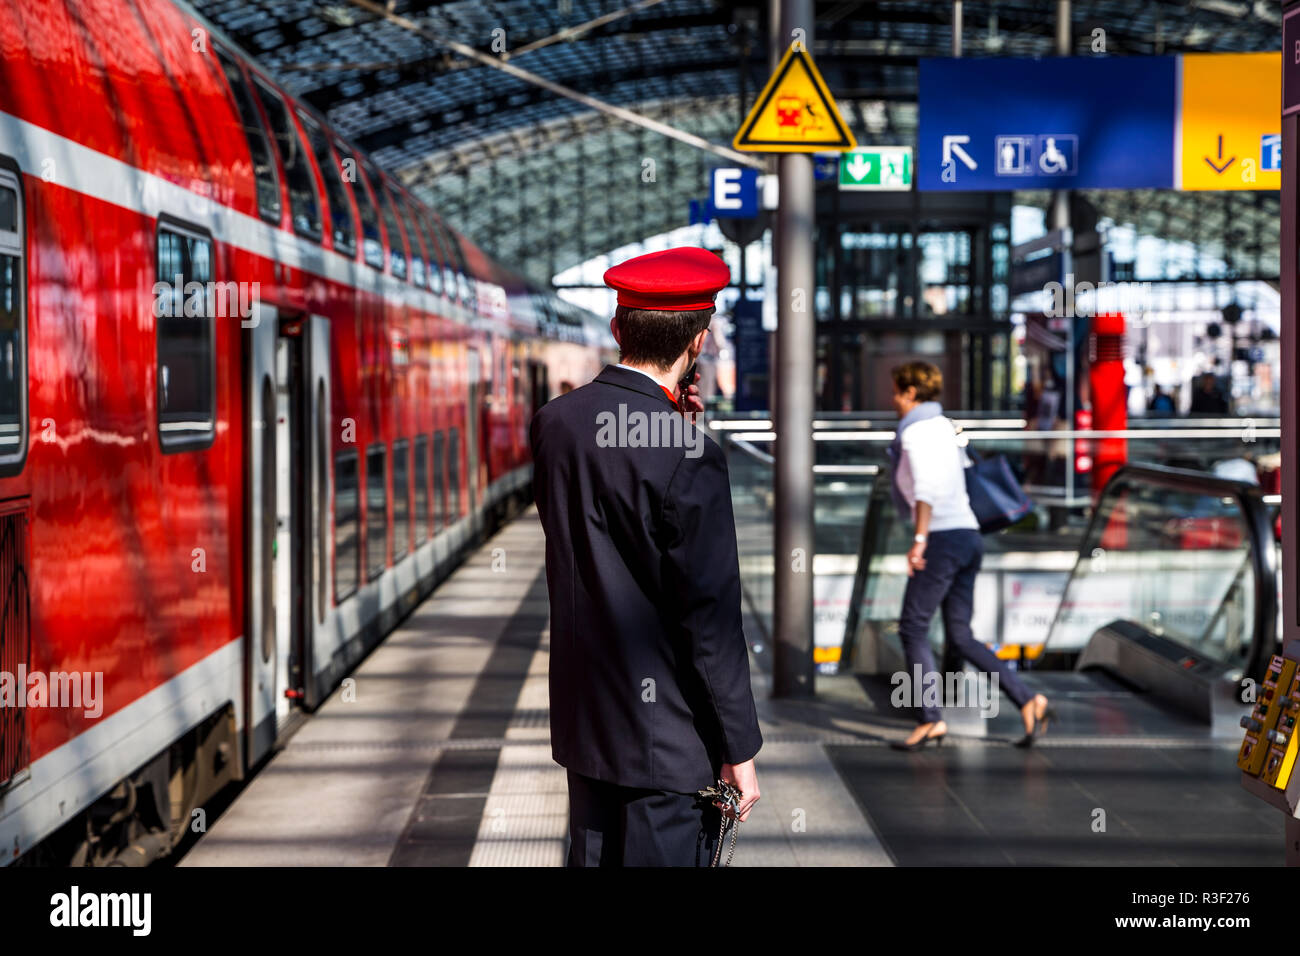 A railway worker at work in the main train station (Hauptbahnhof), Berlin, Germany. Stock Photo